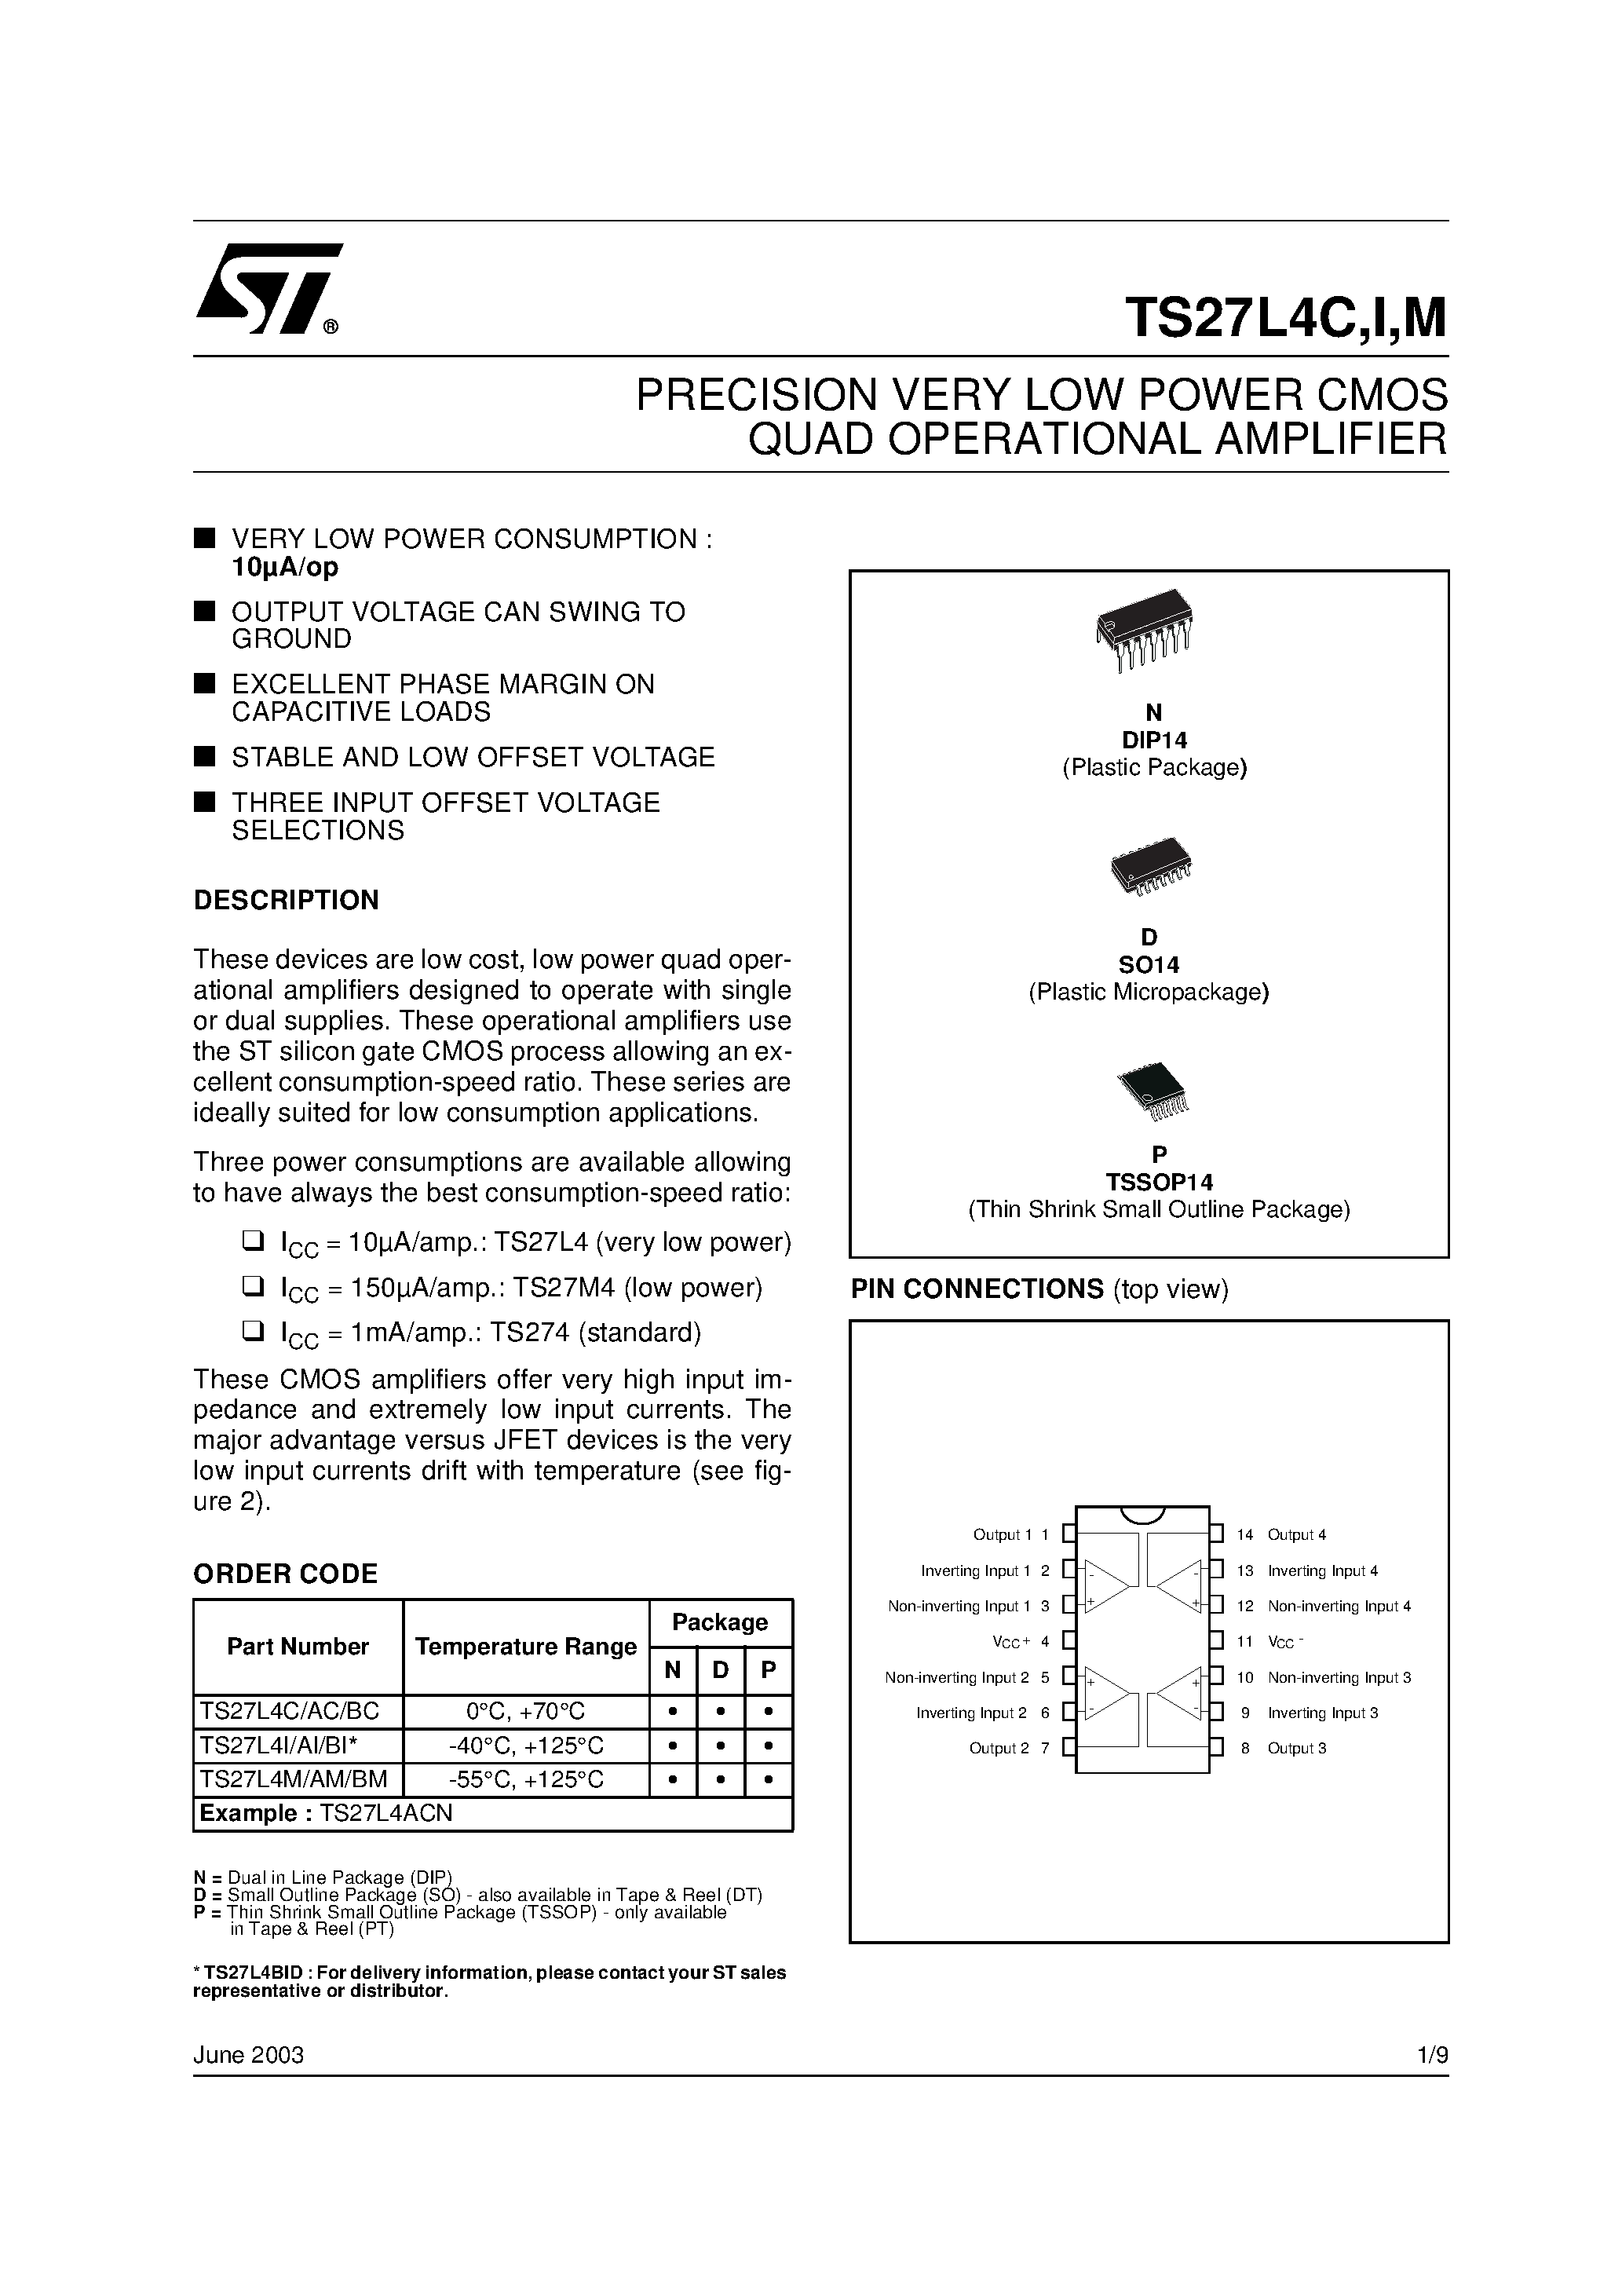 Datasheet TS27L4AM - PRECISION VERY LOW POWER CMOS QUAD OPERATIONAL AMPLIFIER page 1